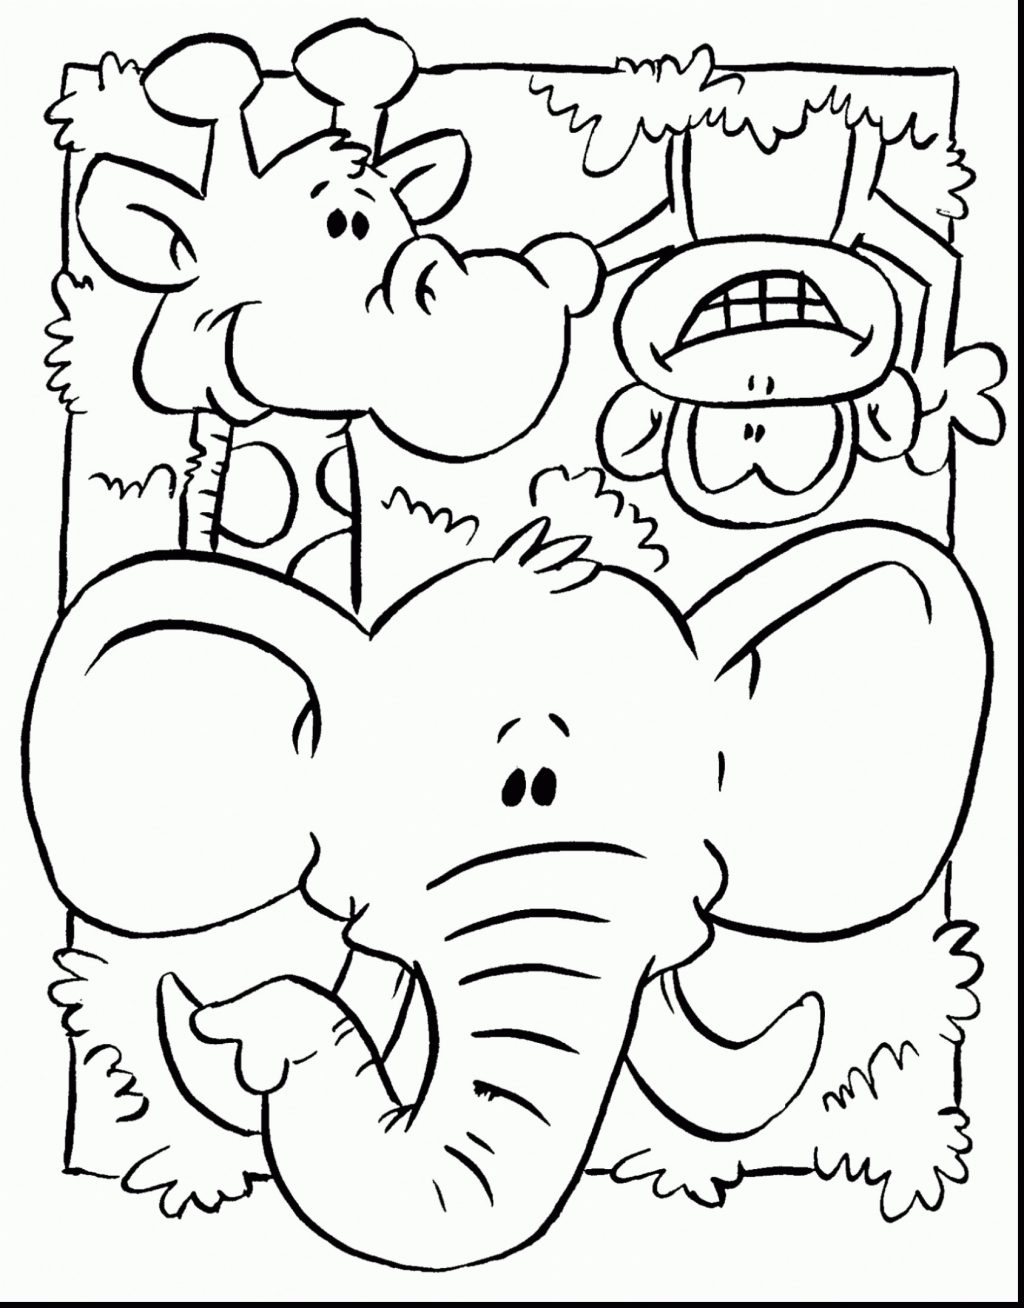 Coloring Page ~ Zoo Animal Colouring Pages Valuegolfireland Coloring - Free Printable Pictures Of Zoo Animals